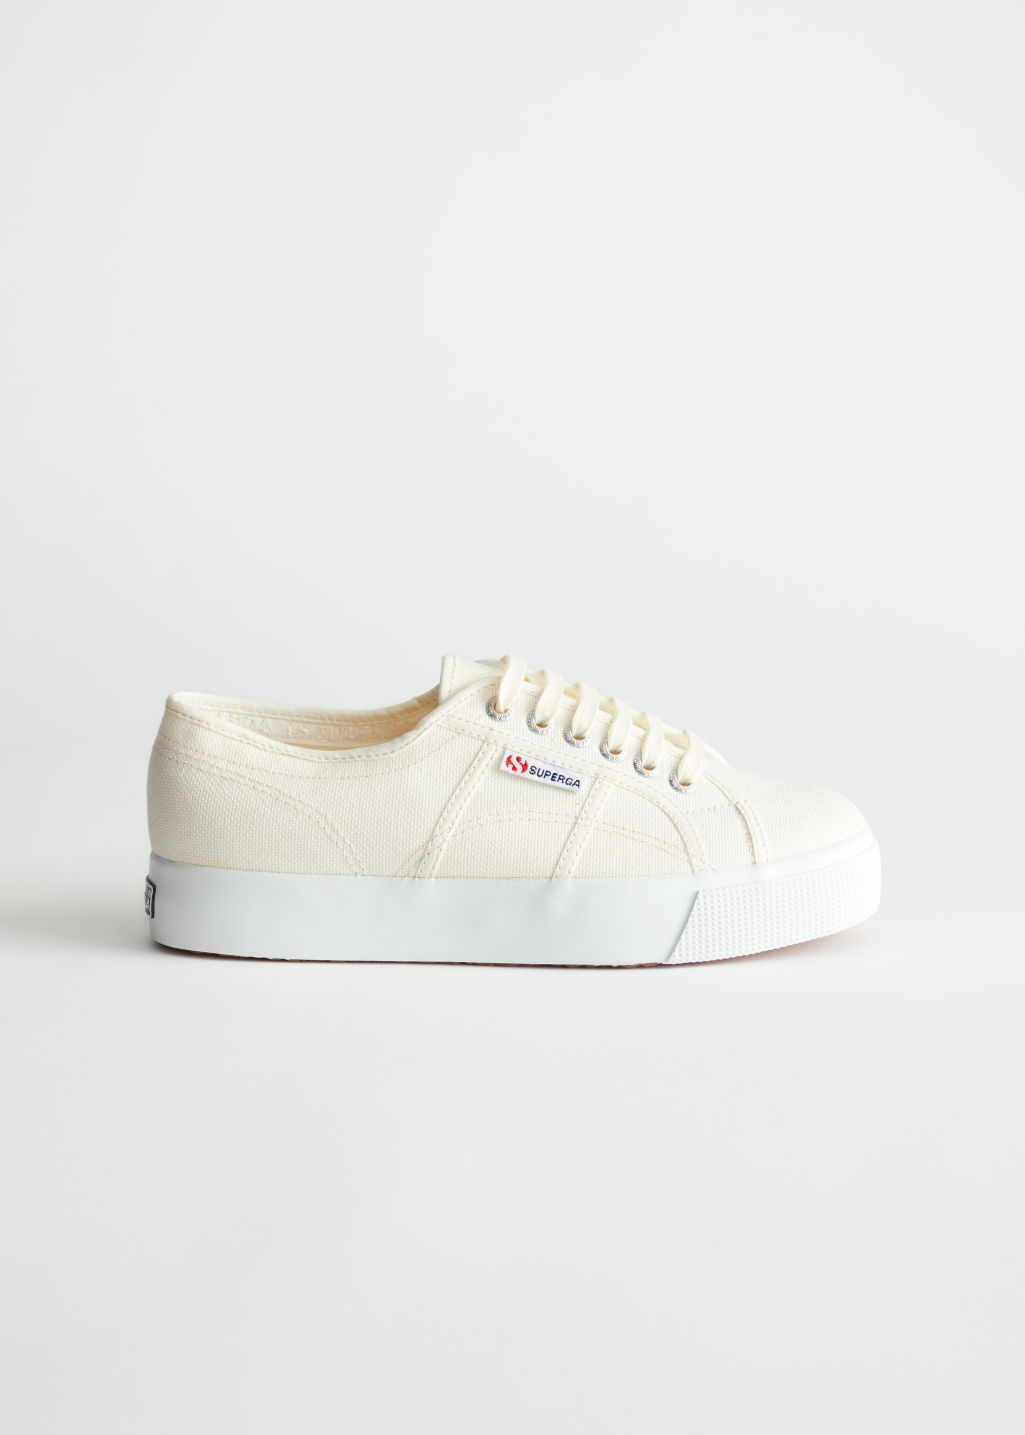 Superga 2730 Sneakers - Off White - Superga - & Other Stories - Click Image to Close